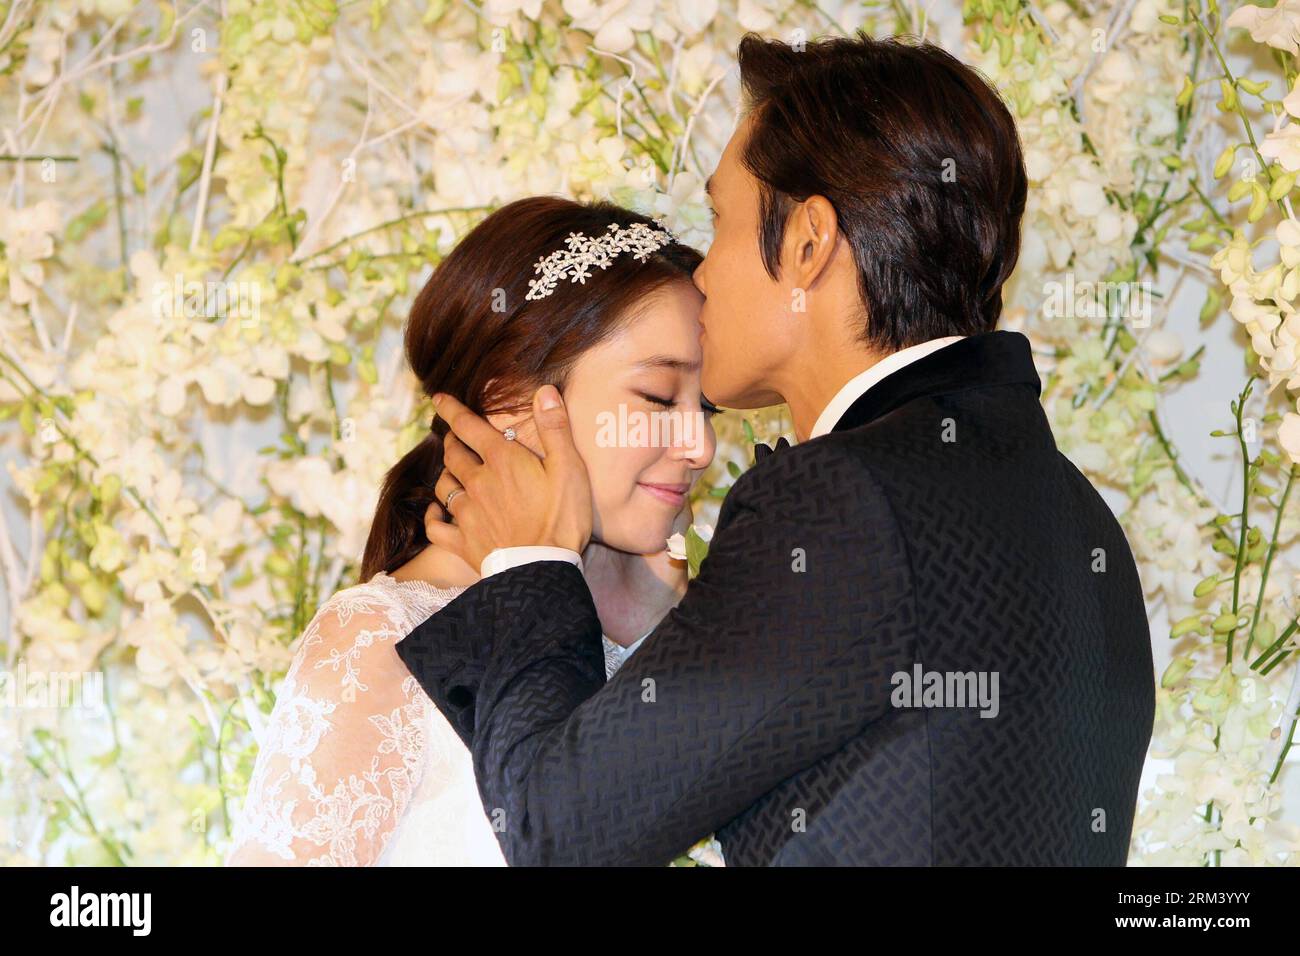 Bildnummer: 60347229  Datum: 10.08.2013  Copyright: imago/Xinhua South Korean actor Lee Byung-hun (R) kiss his wife Lee Min-jung during a news conference before their wedding in Seoul, capital of South Korea, on Aug. 10, 2013. (Xinhua/Park Jin-hee) (syq) SOUTH KOREA-SEOUL-LEE BYUNG-HUN-LEE MIN-JUNG-WEDDING PUBLICATIONxNOTxINxCHN People xcb x0x 2013 quer     60347229 Date 10 08 2013 Copyright Imago XINHUA South Korean Actor Lee Byung HUN r Kiss His wife Lee Min Young during a News Conference Before their Wedding in Seoul Capital of South Korea ON Aug 10 2013 XINHUA Park Jin Hee  South Korea Seo Stock Photo